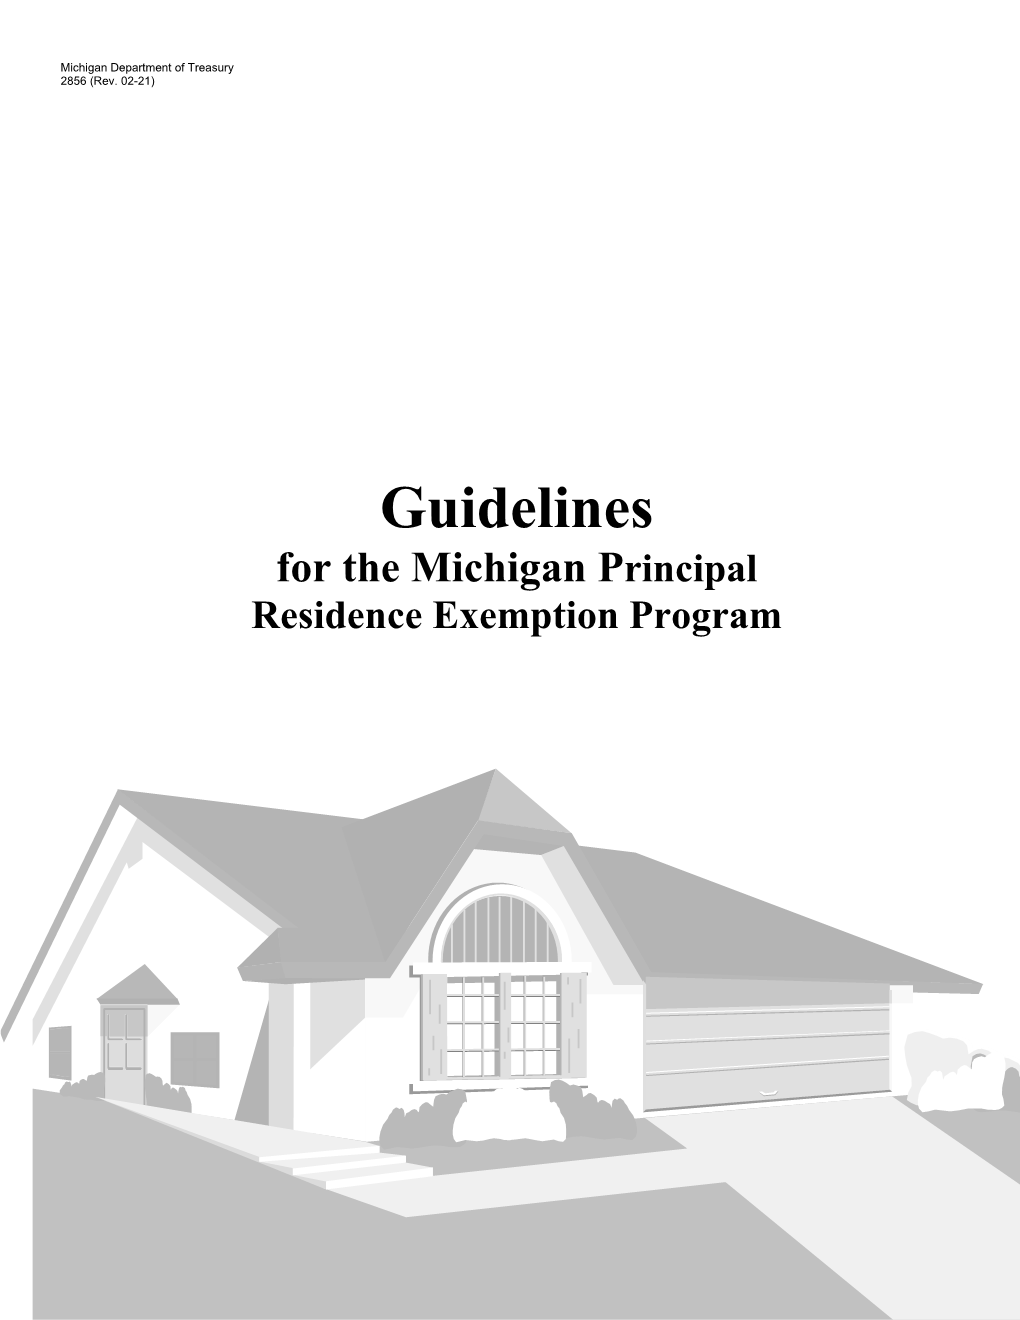 Guidelines for the Michigan Principal Residence Exemption Program Guidelines for the Michigan Principal Residence Exemption Program